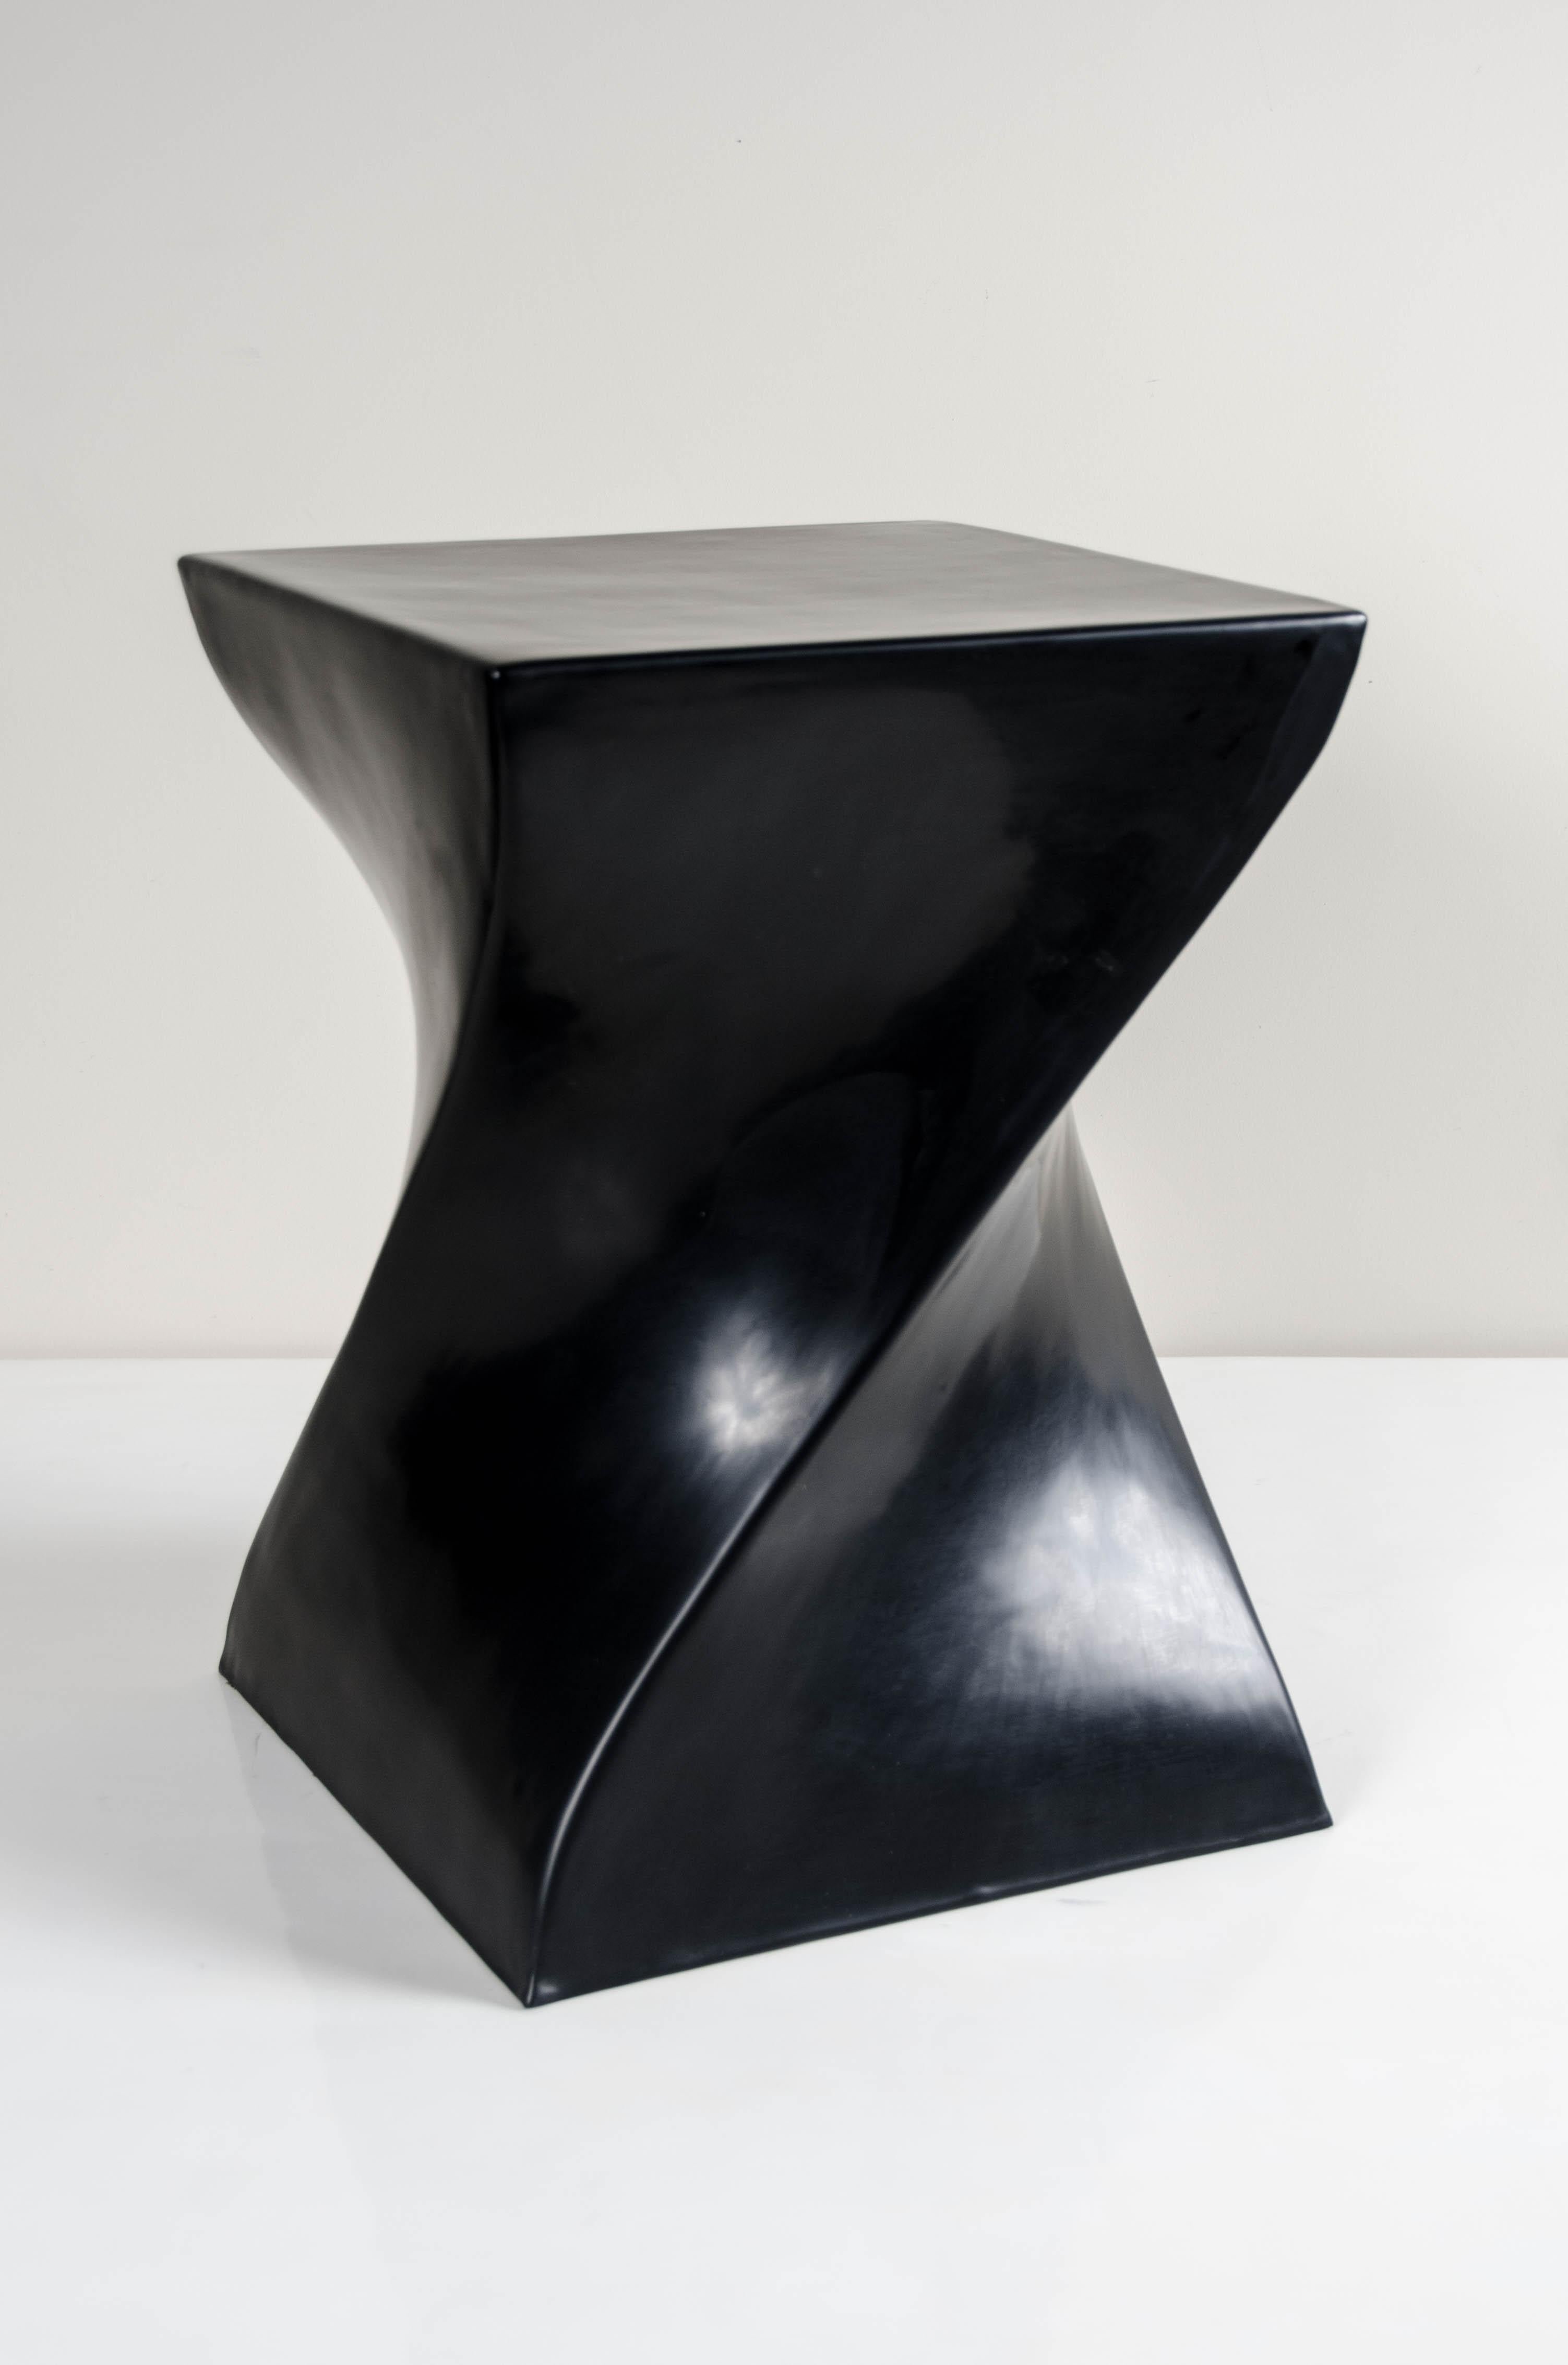 Post-Modern Contemporary Black Lacquer Mod Helix Drumstool by Robert Kuo, Limited Edition